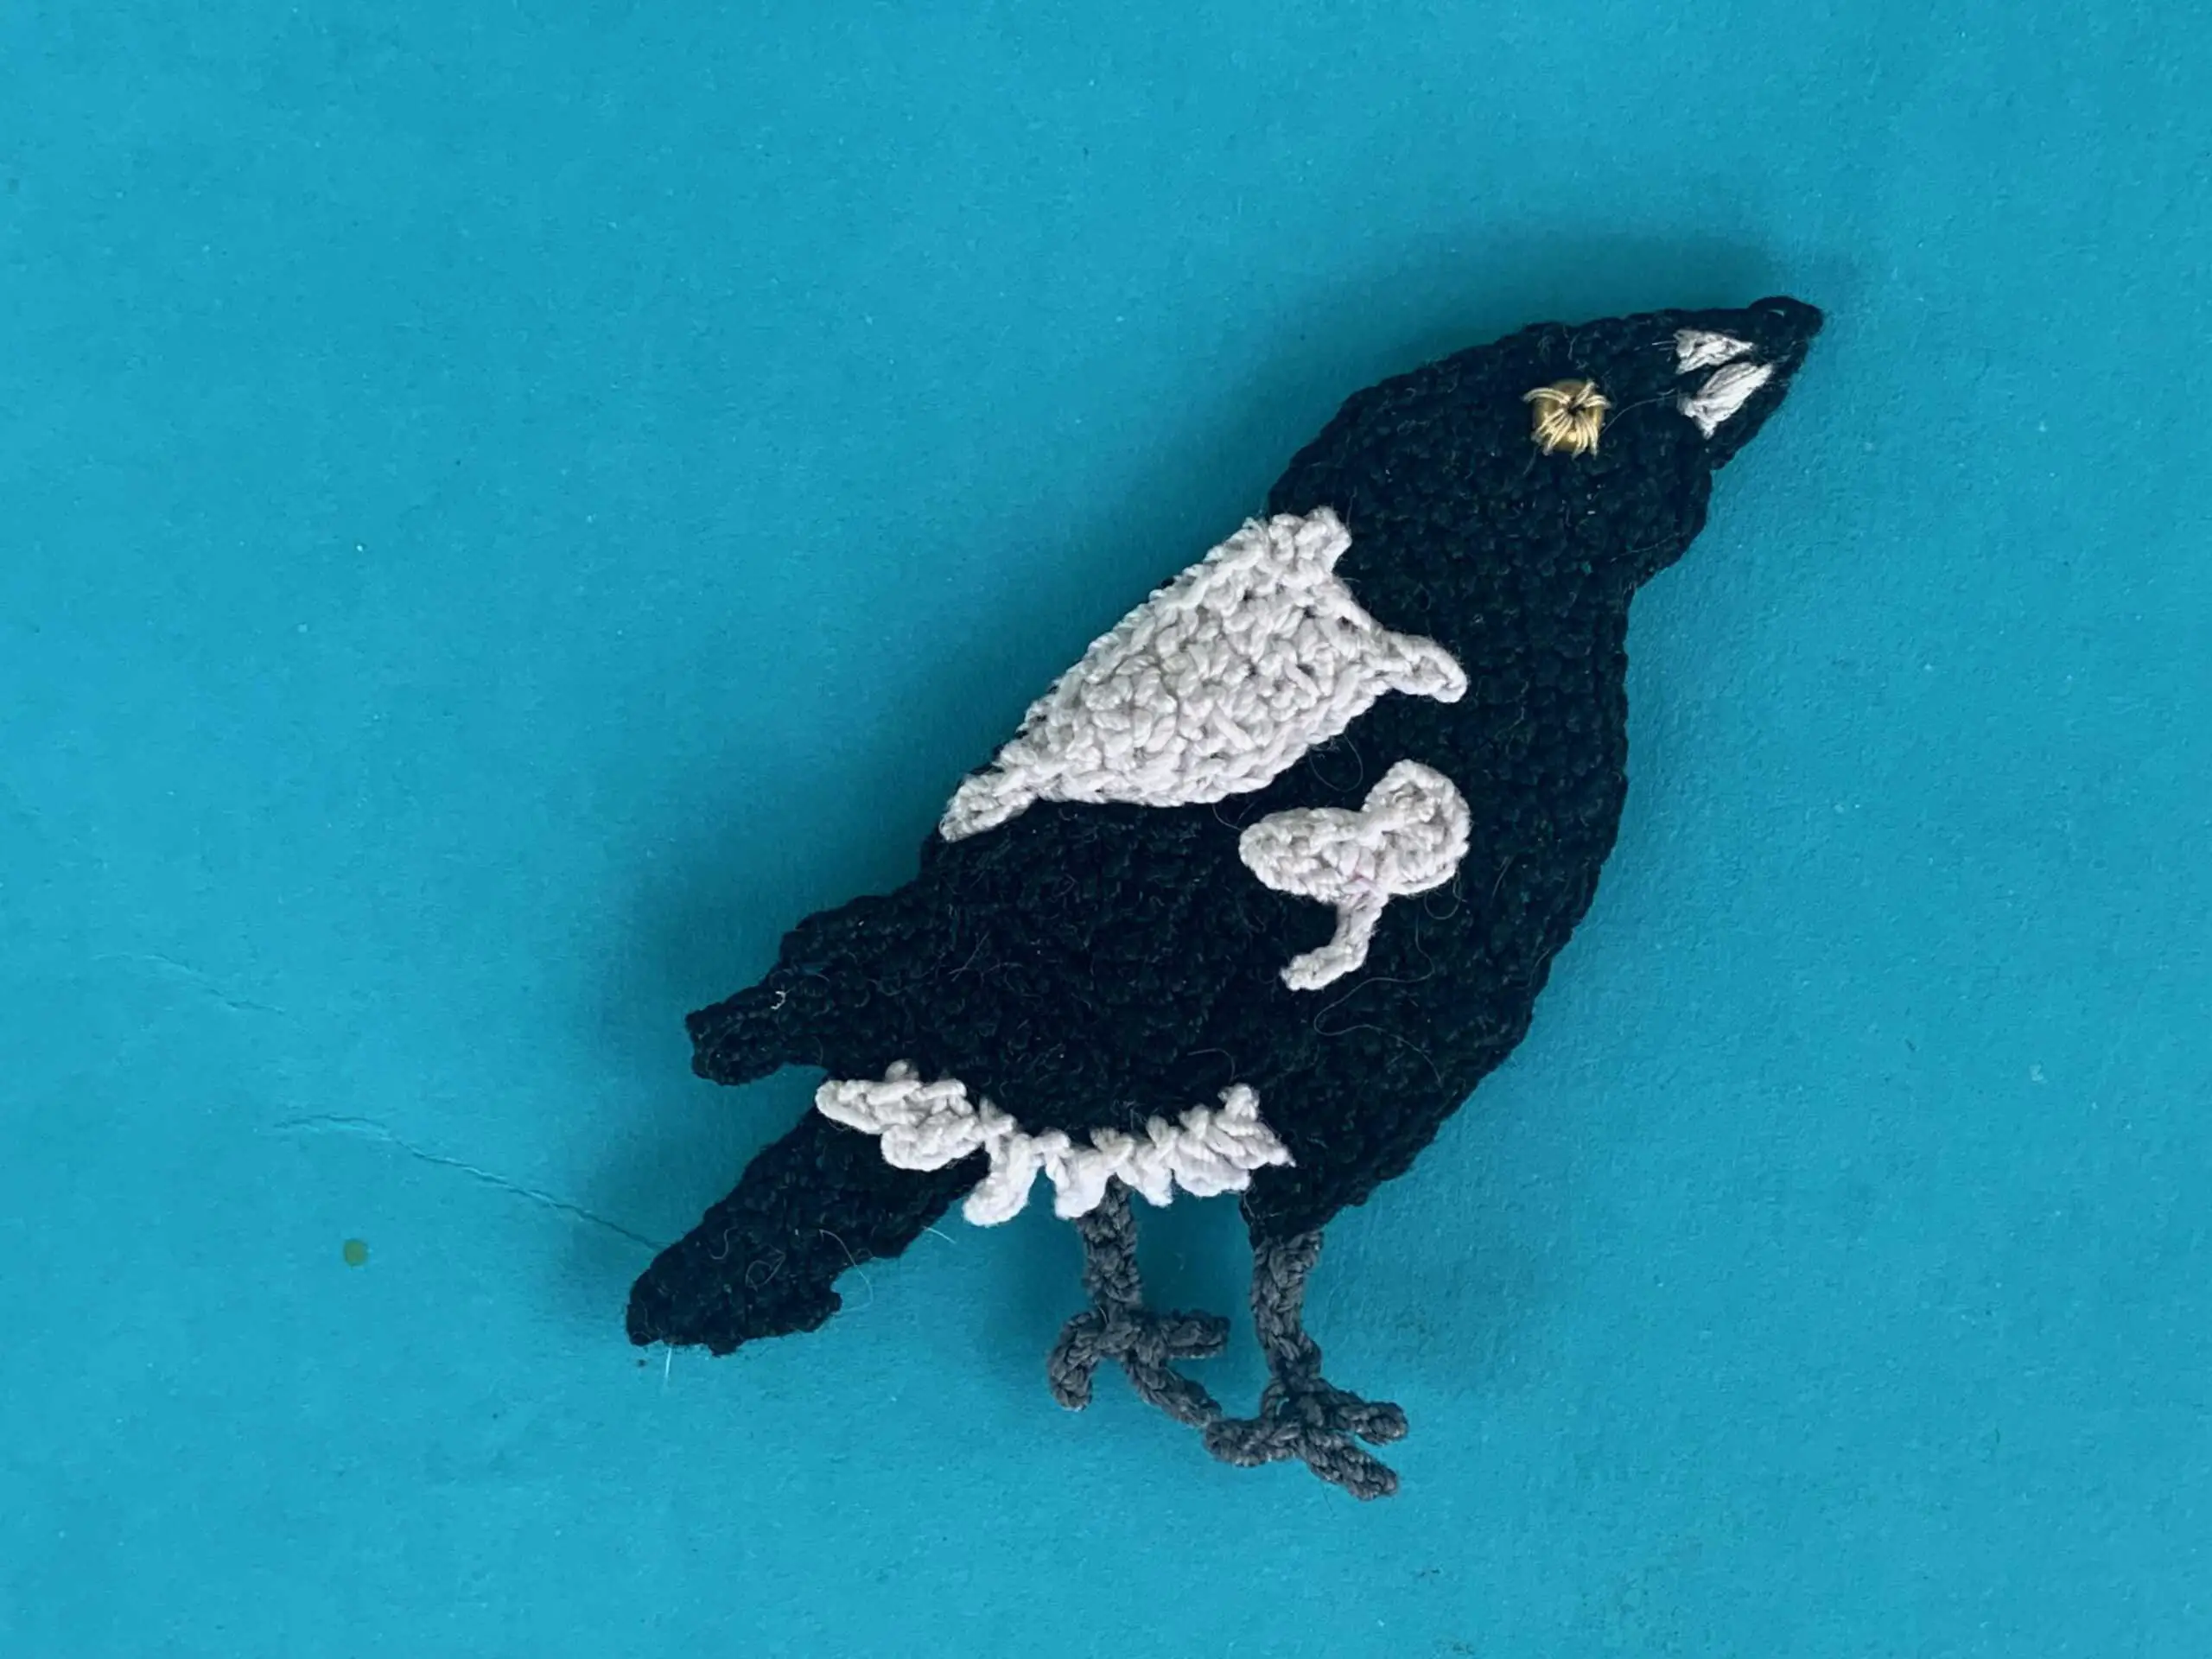 Finished crochet magpie 2 ply landscape